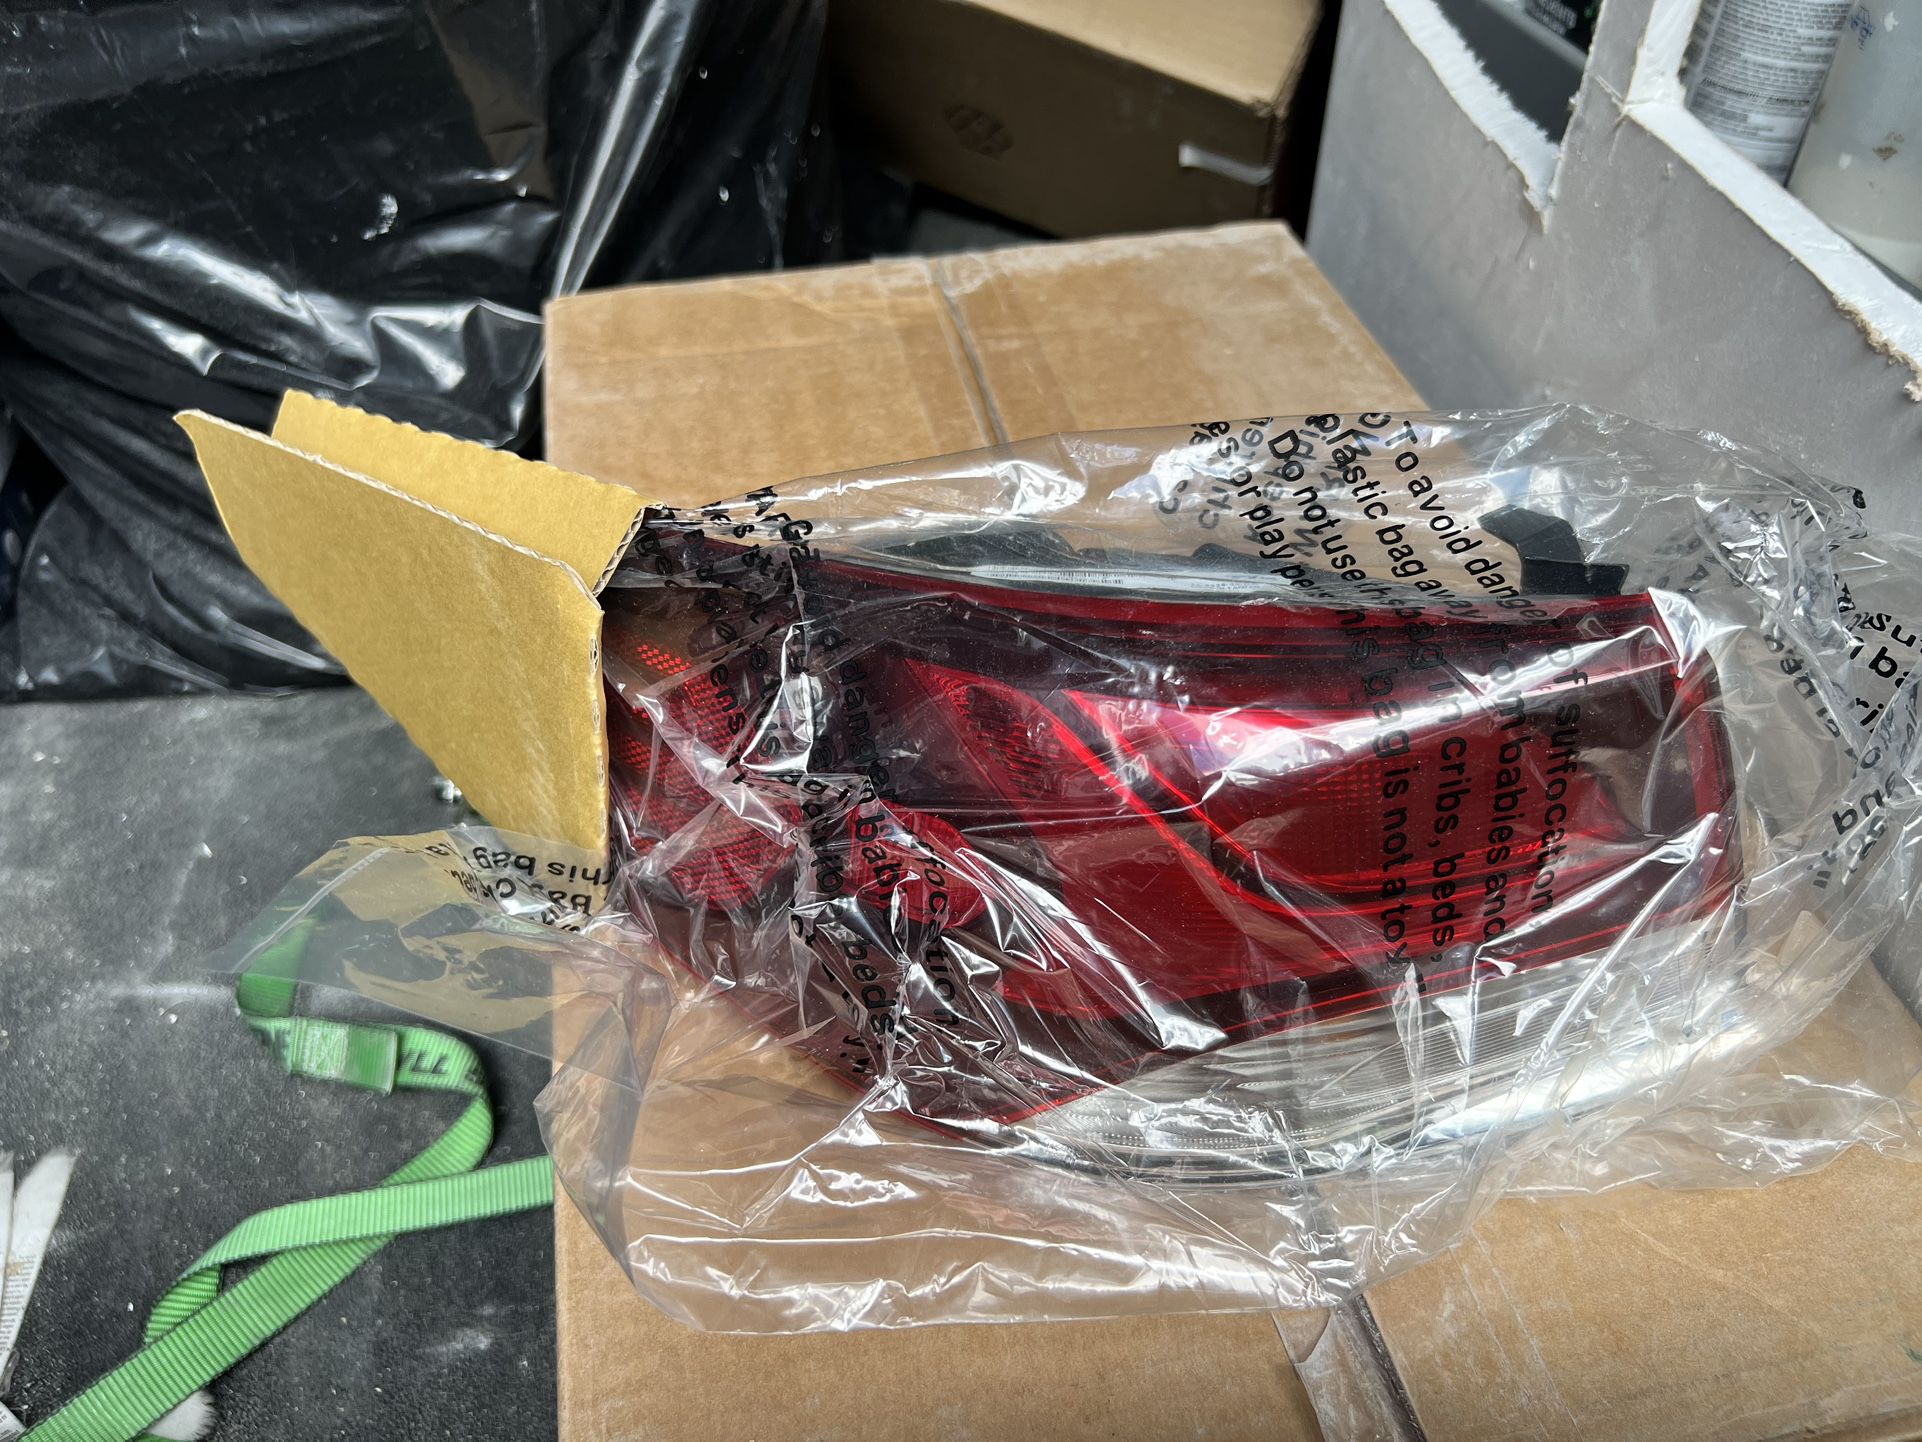 Left hand and right hand rear tail lights for 18-19 Hyundai Sanata $100 a piece brand new. 